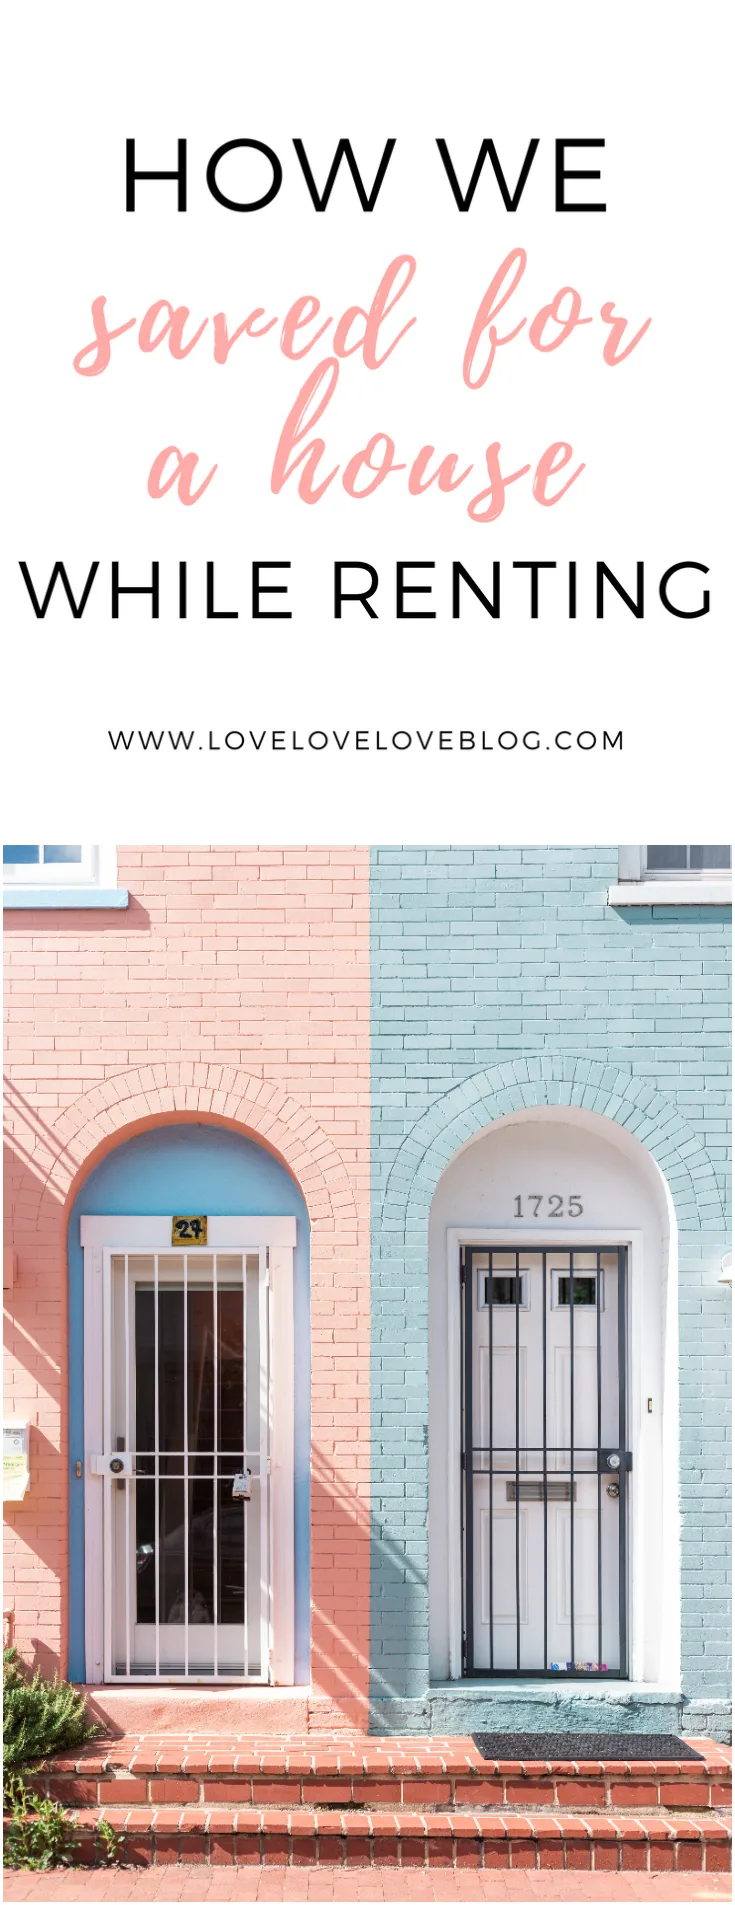 Save for a house while renting